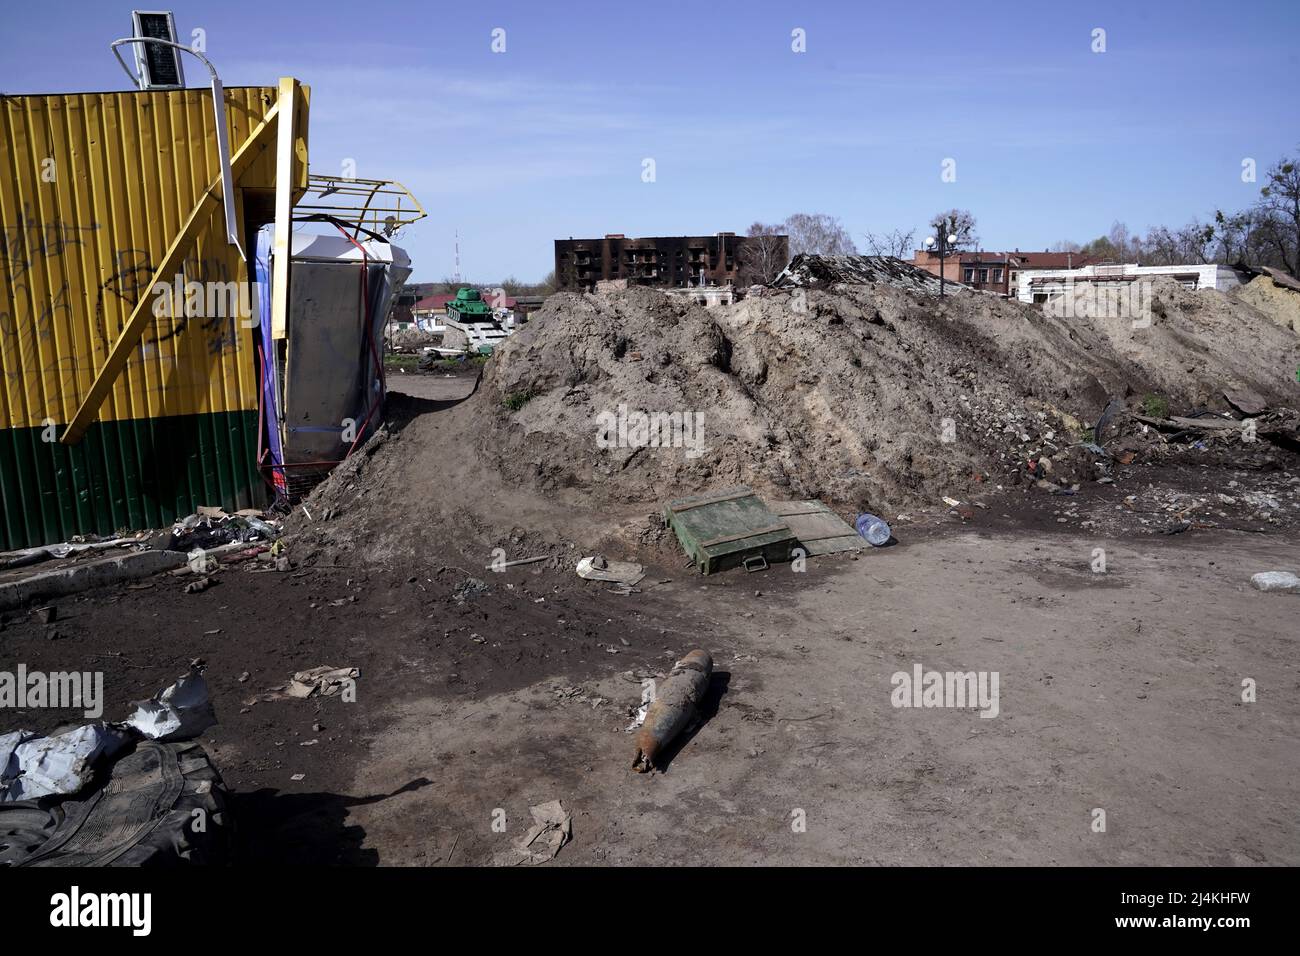 TROSTIANETS, UKRAINE - APRIL 15, 2022 - The remains of ammunition are pictured on the street in the city liberated from Russian invaders, Trostianets, Stock Photo